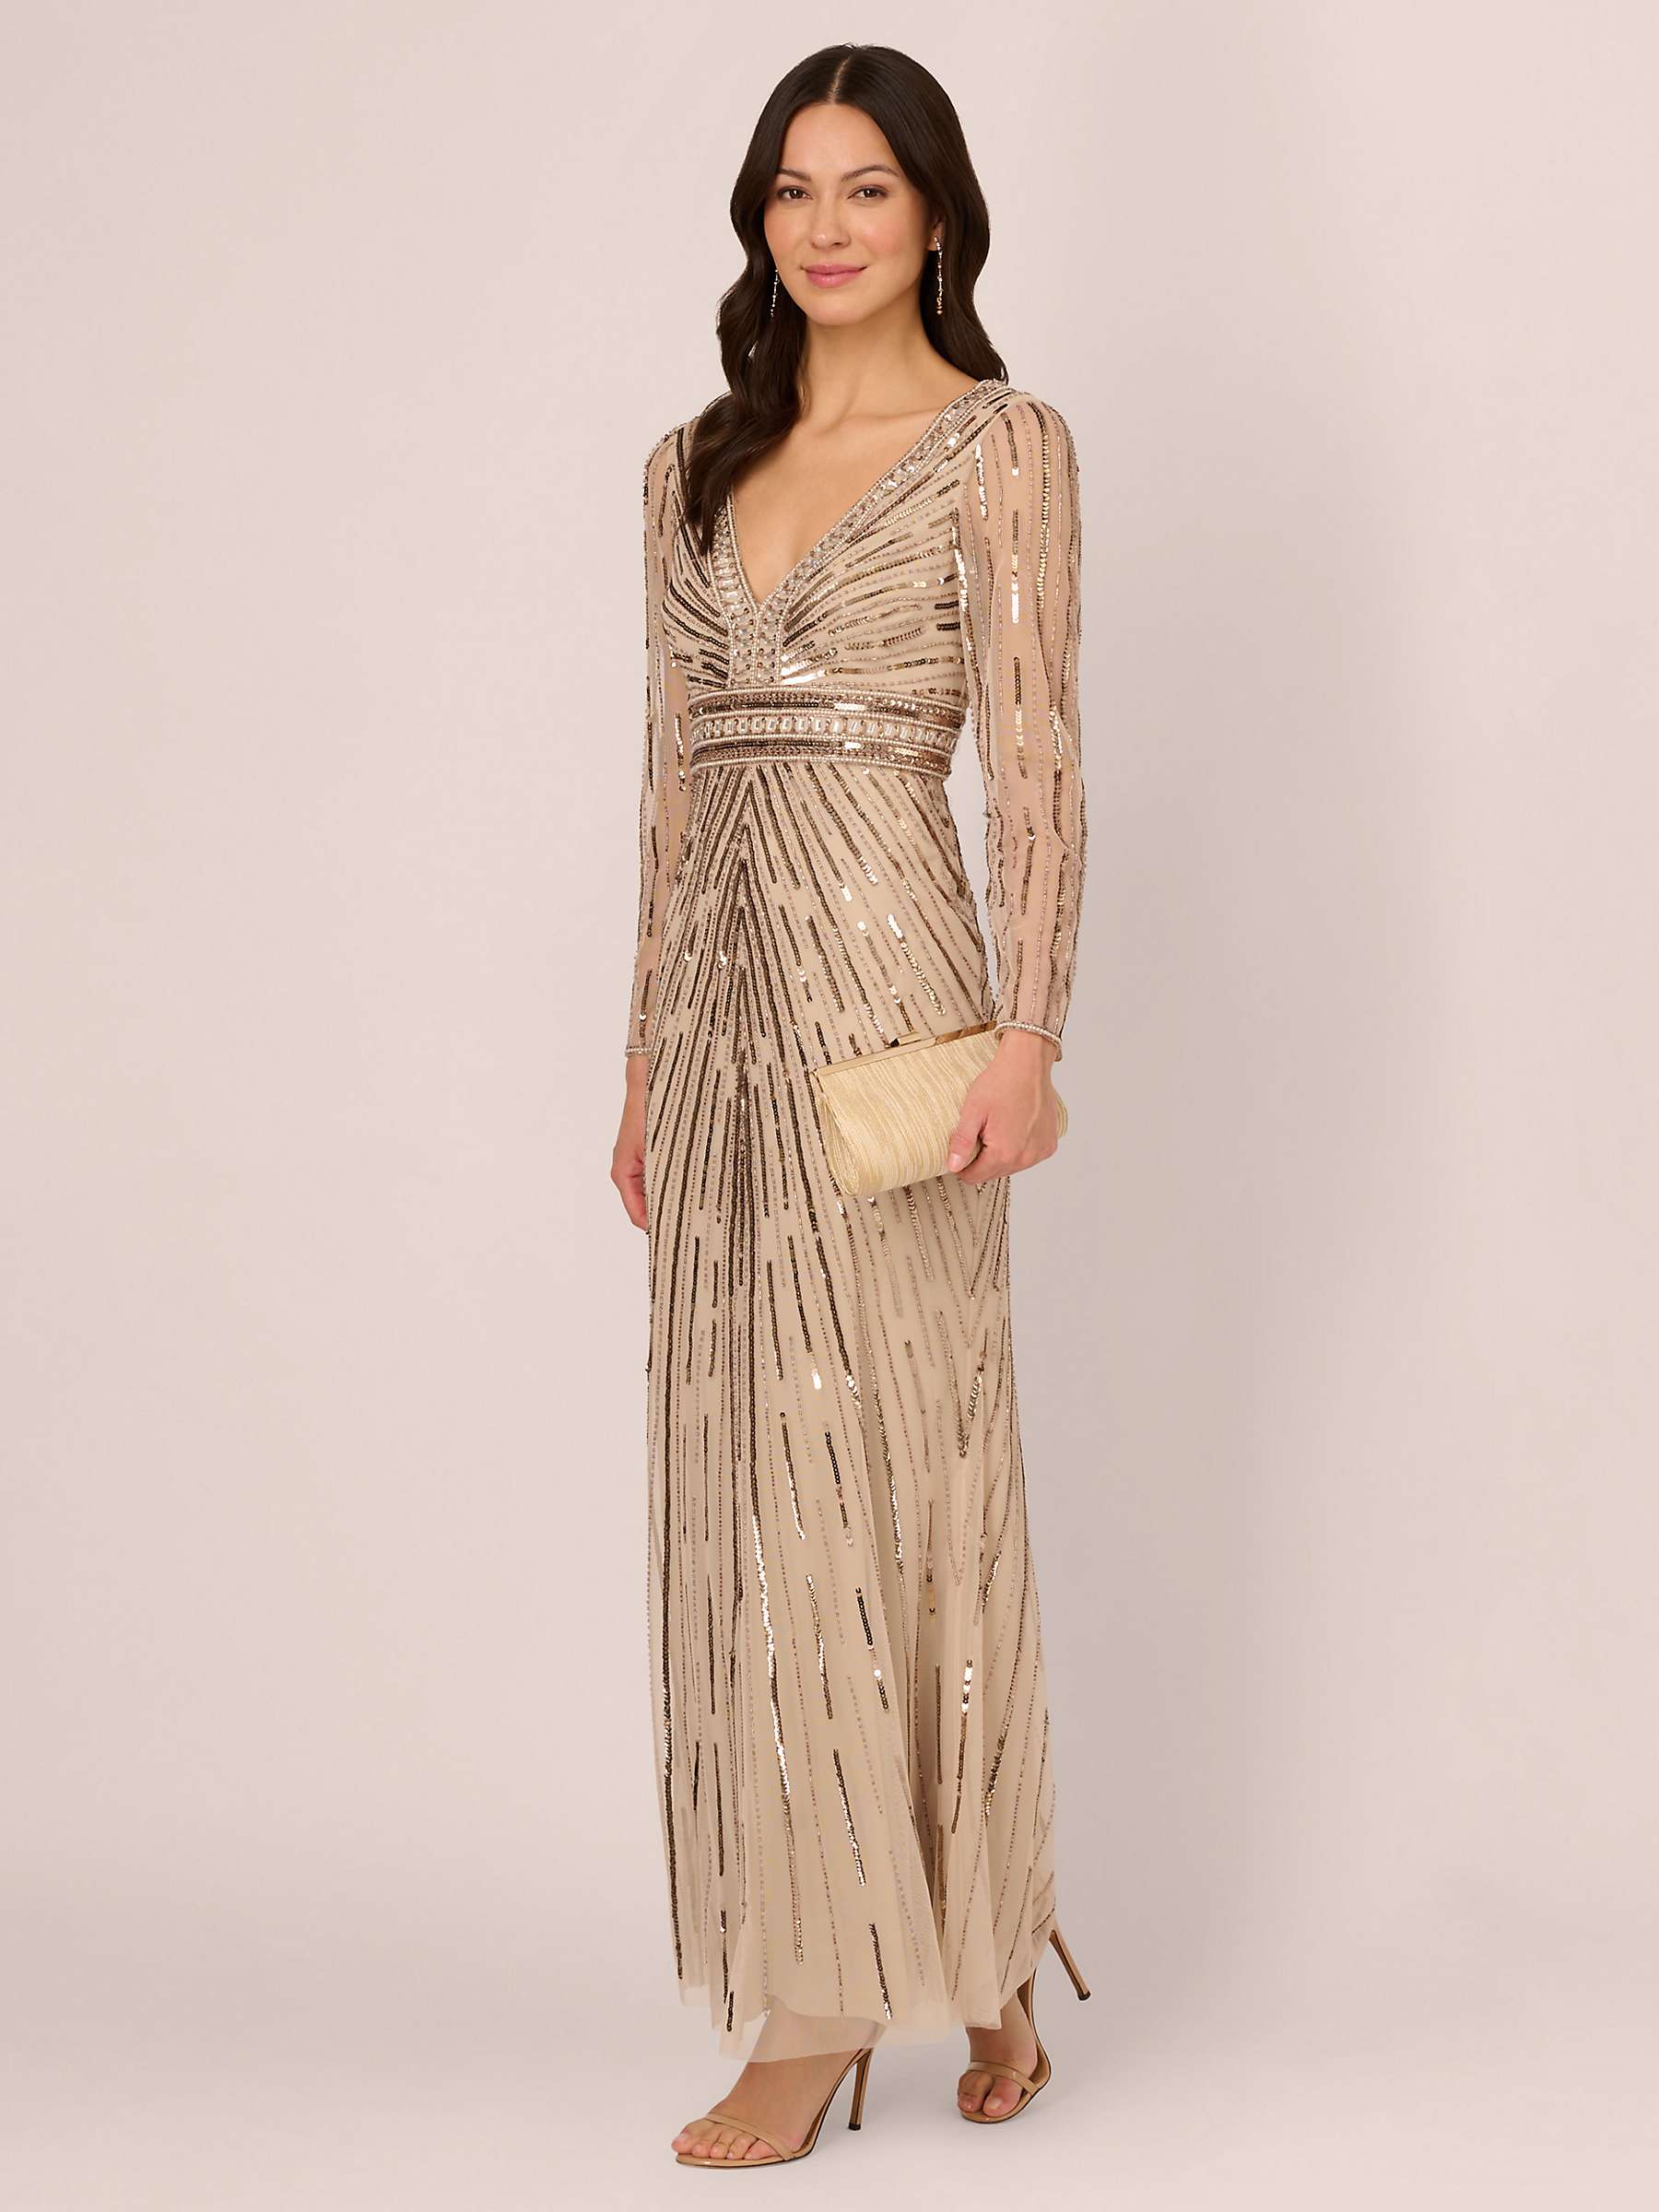 Buy Adrianna Papell Beaded Maxi Dress, Biscotti Online at johnlewis.com